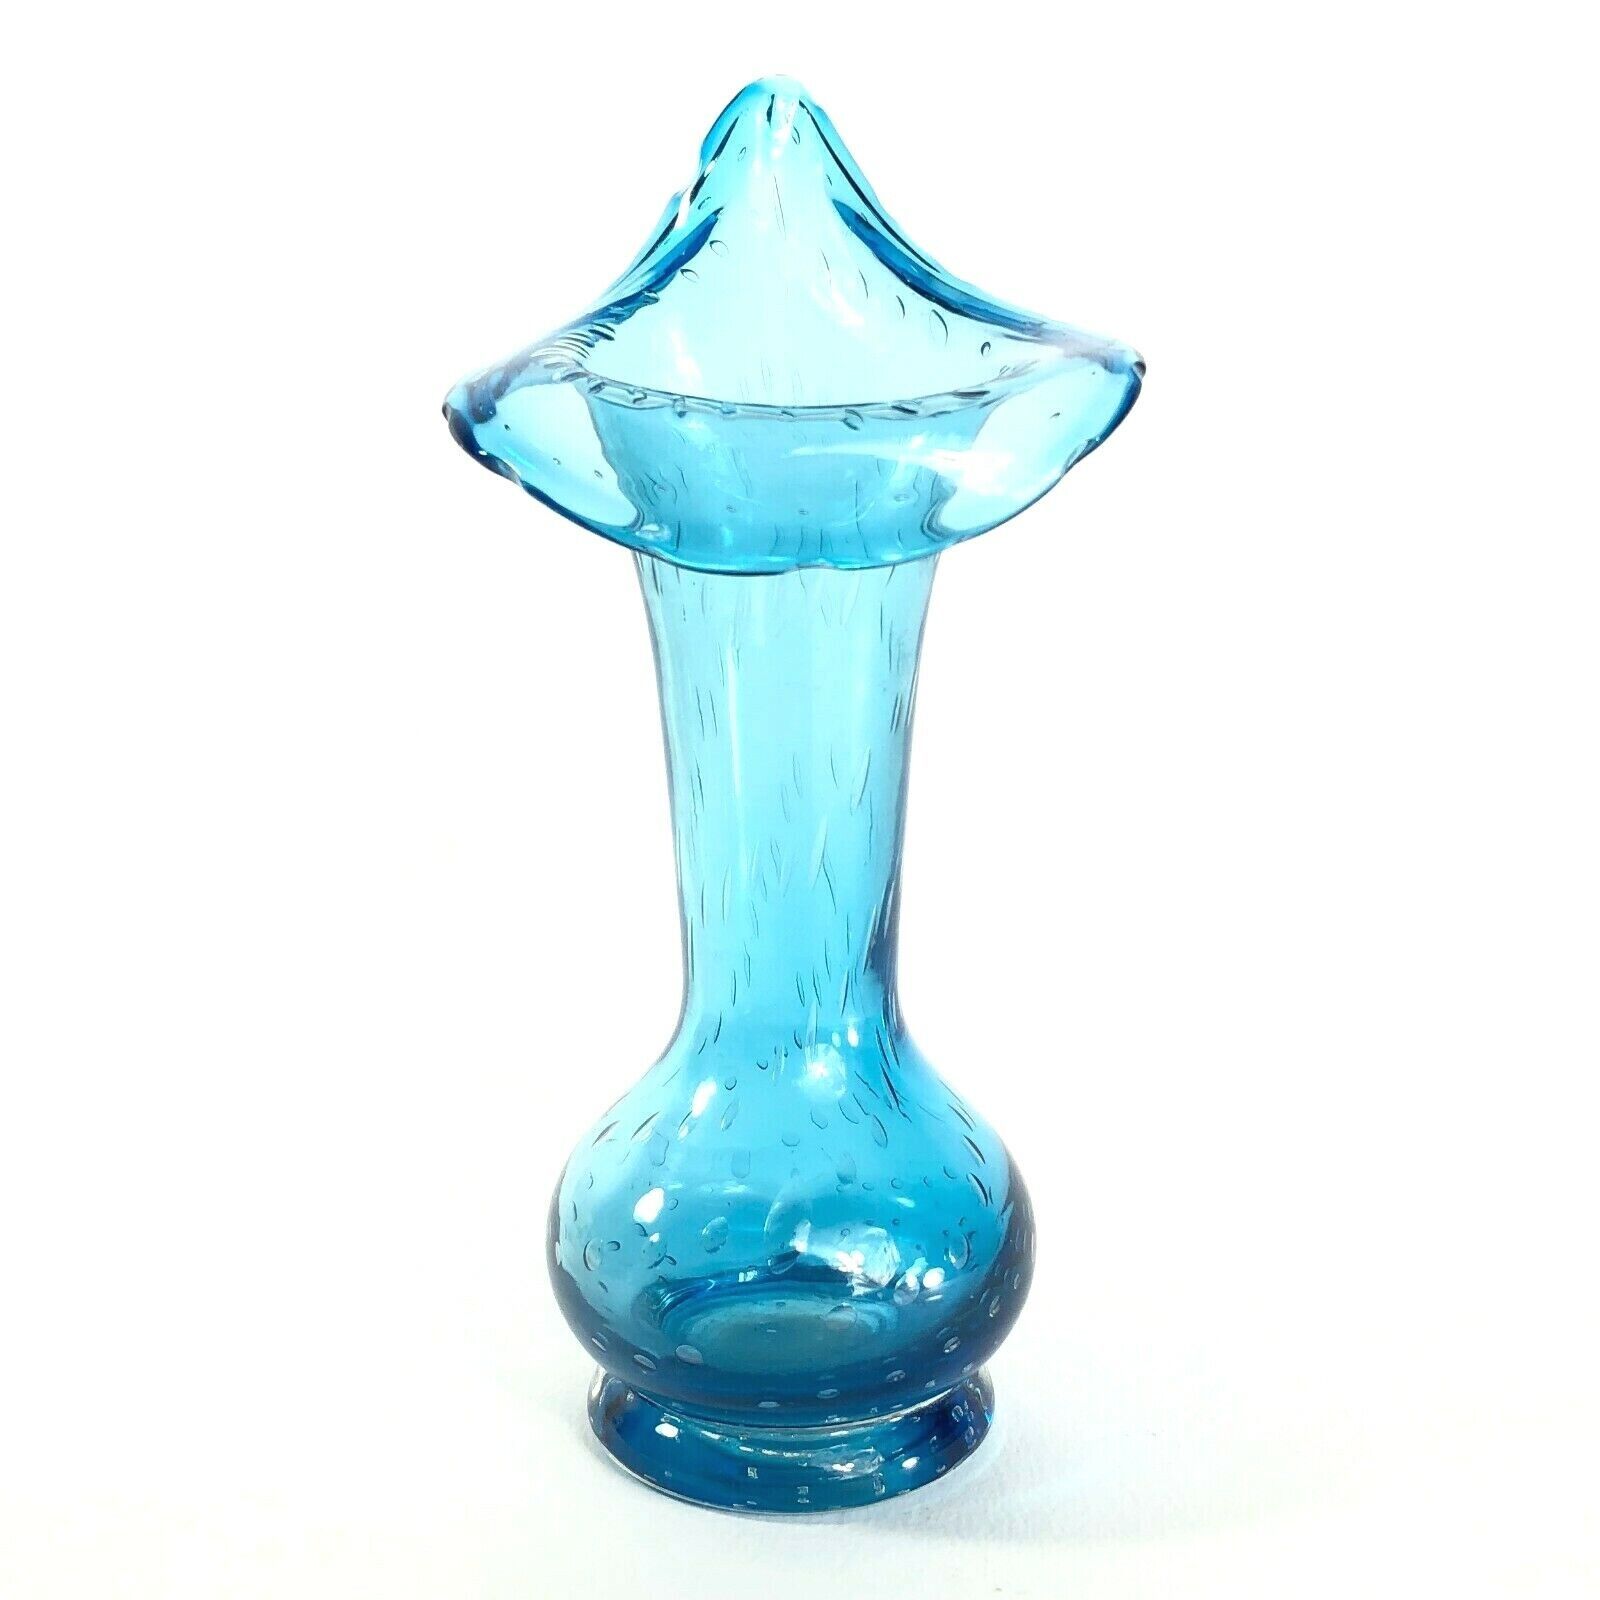 Primary image for Vintage Kreiss Art Glass Jack in the Pulpit Vase Blown Turquoise Blue 7.75" 